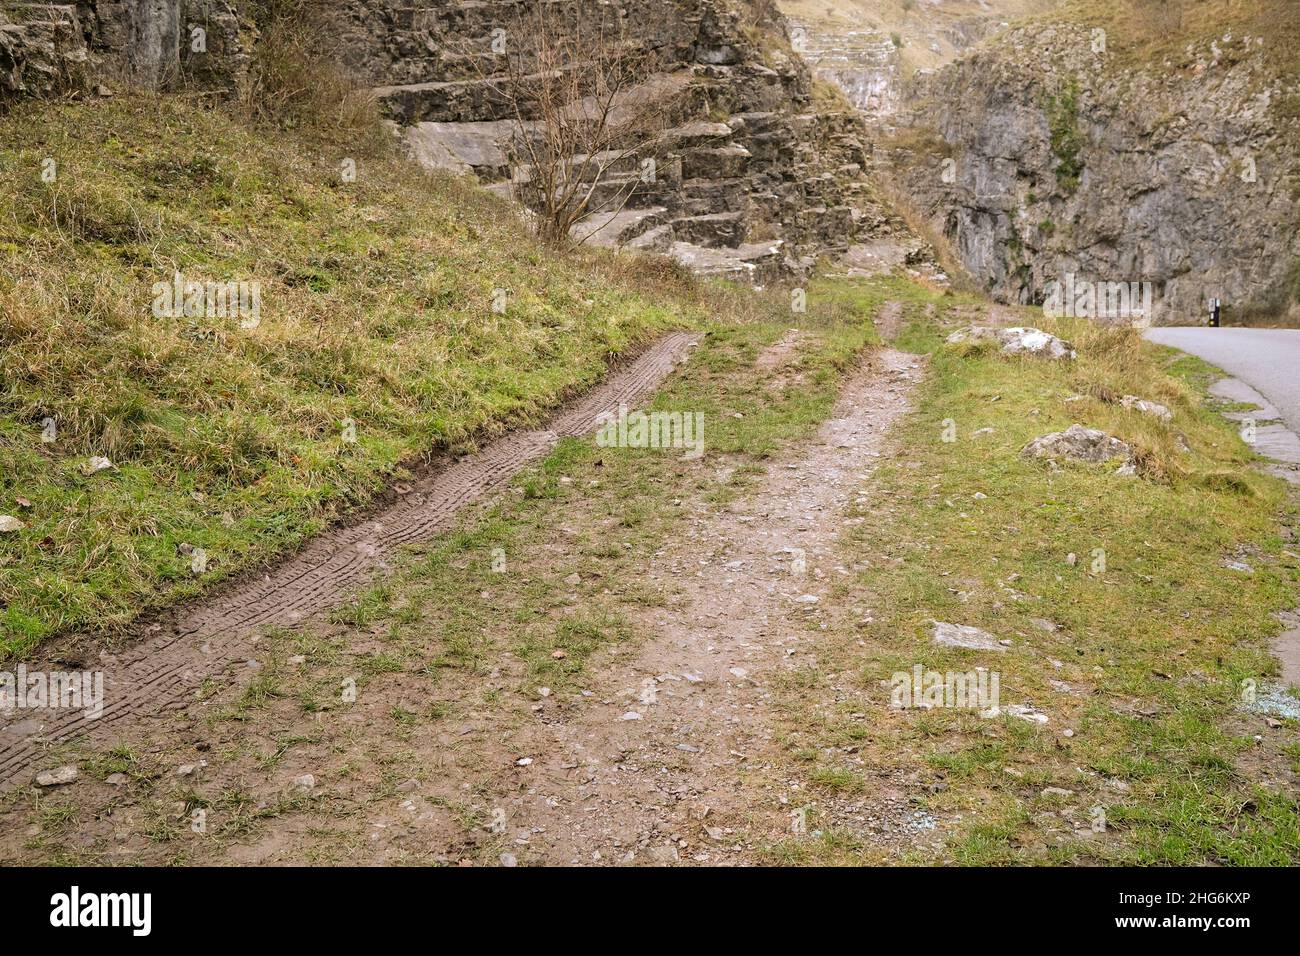 January 2022 - Environmental damage caused to the side of Cheddar Gorge where people try out their 4x4 SUV's in Somerset, England, UK. Stock Photo